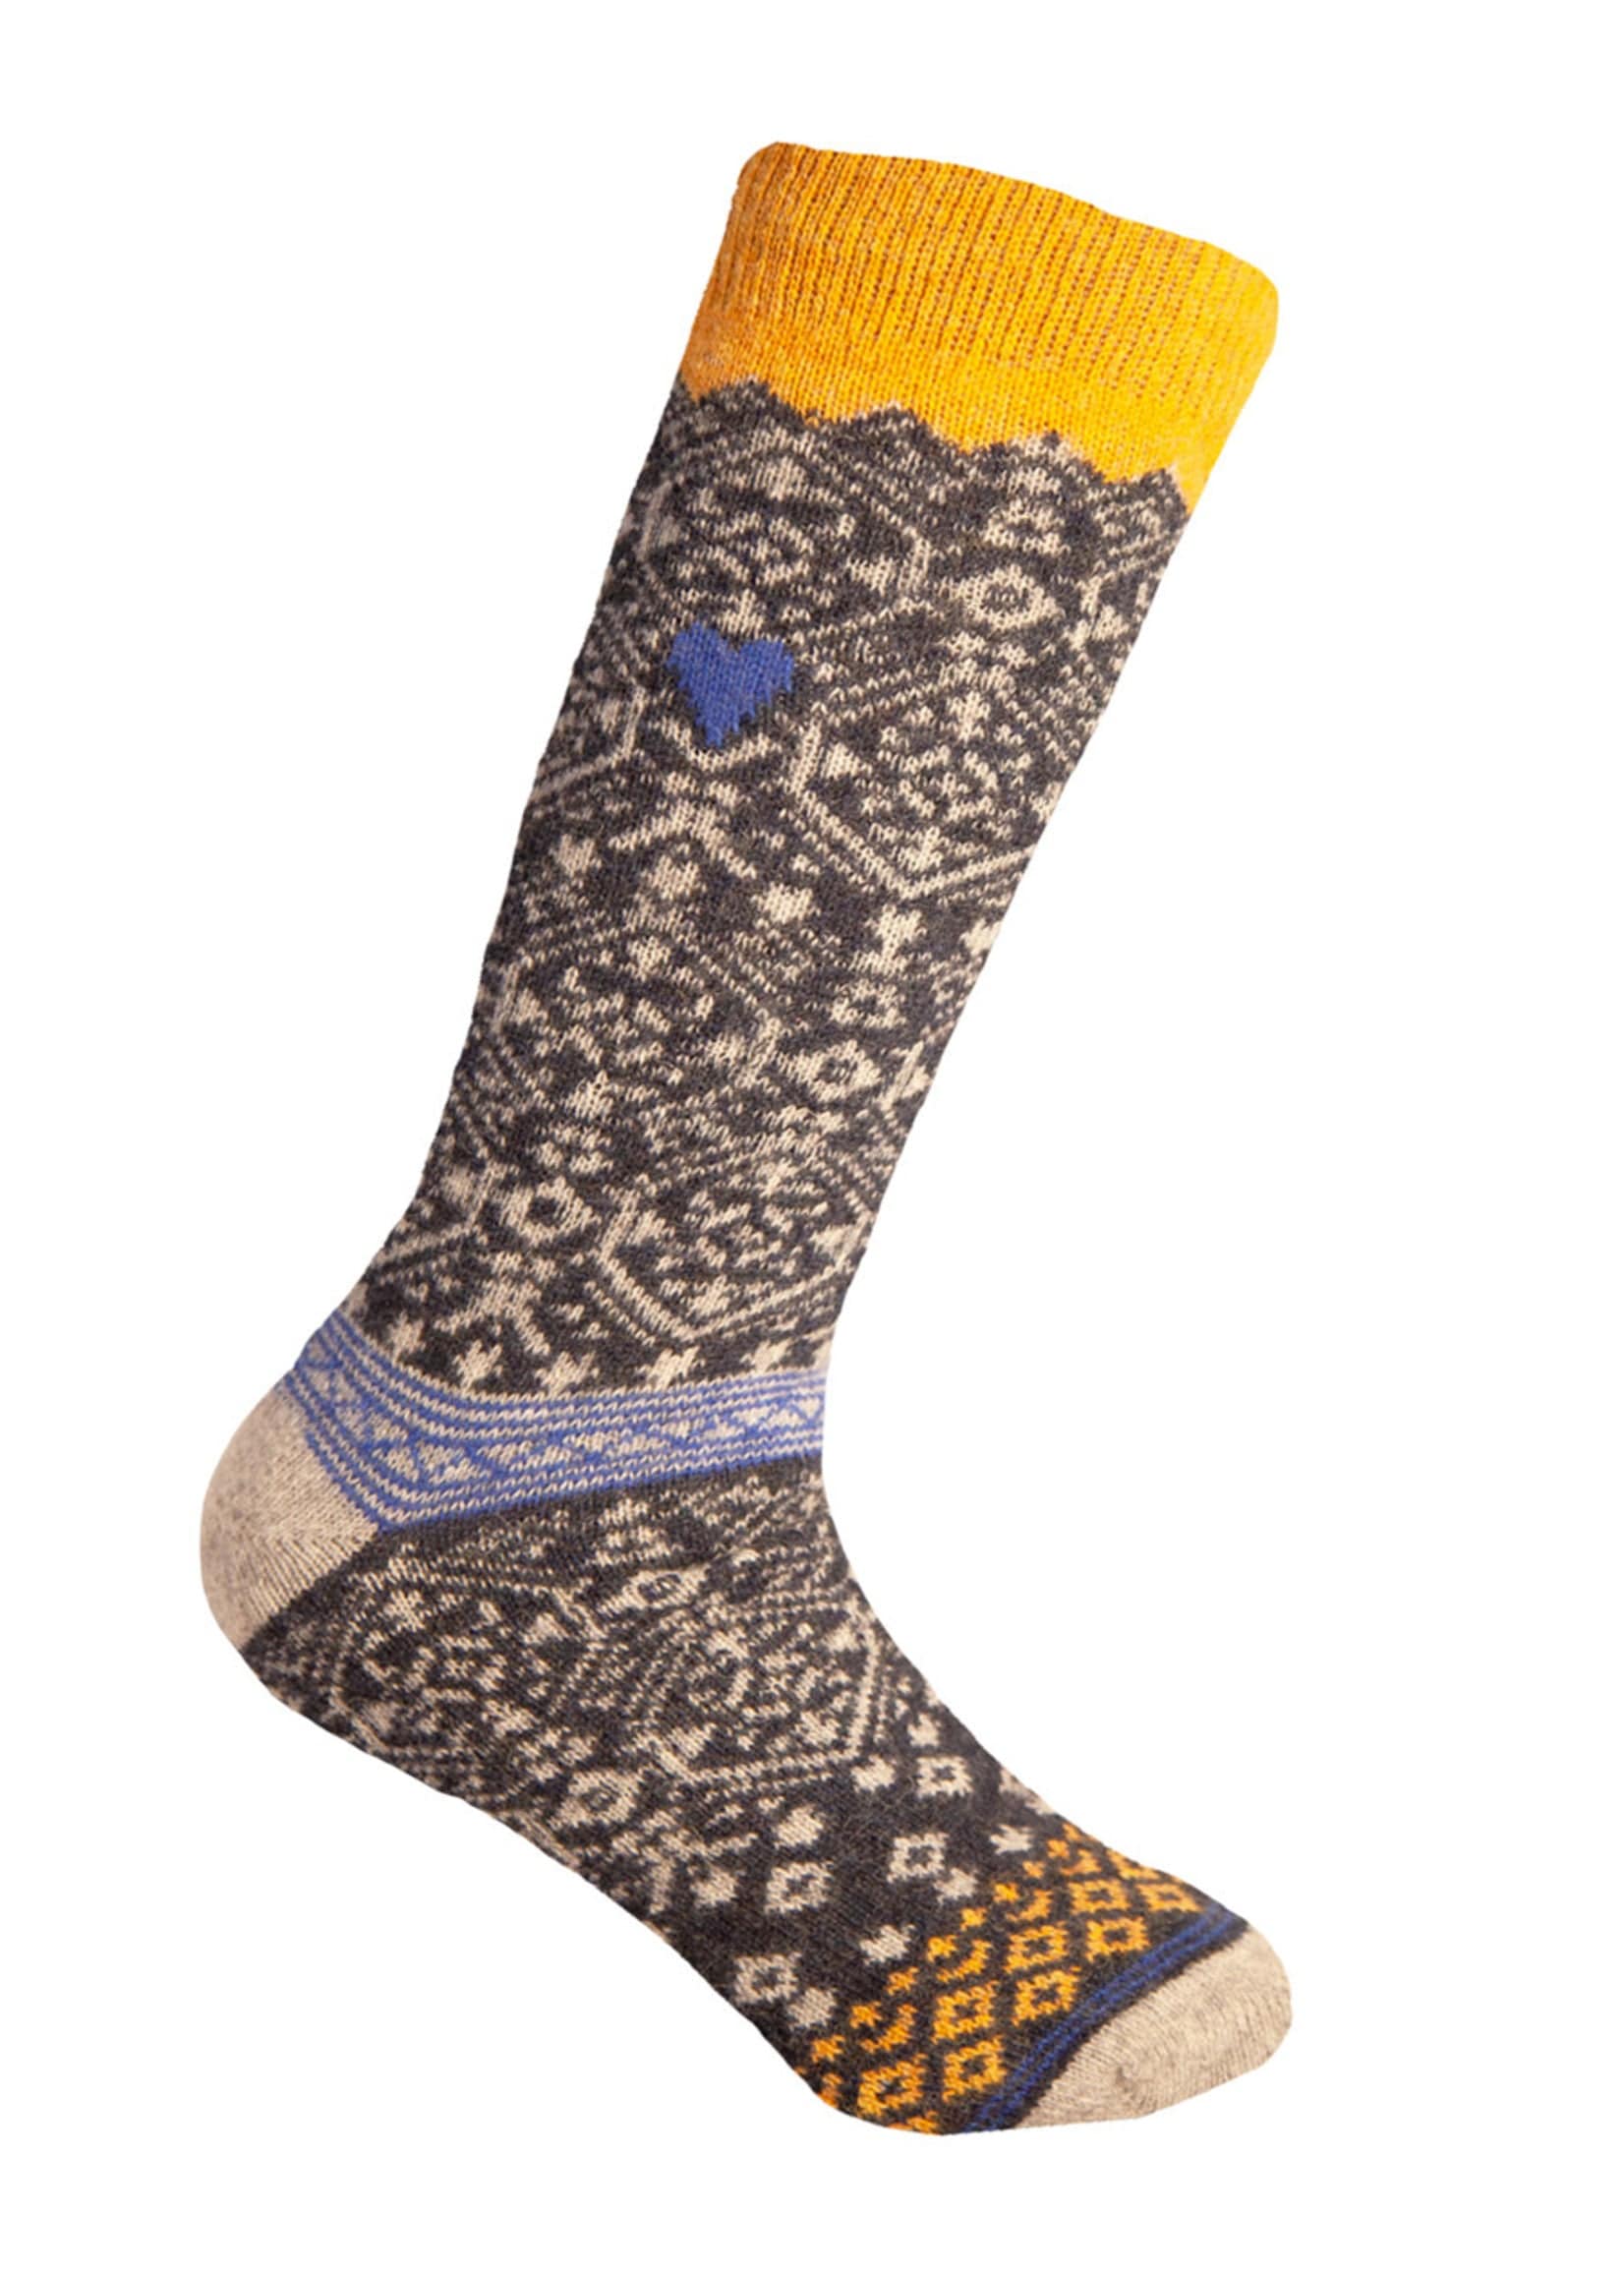 Norfinde Norwegian wool socks with a small woven Swedish flag, dark gray